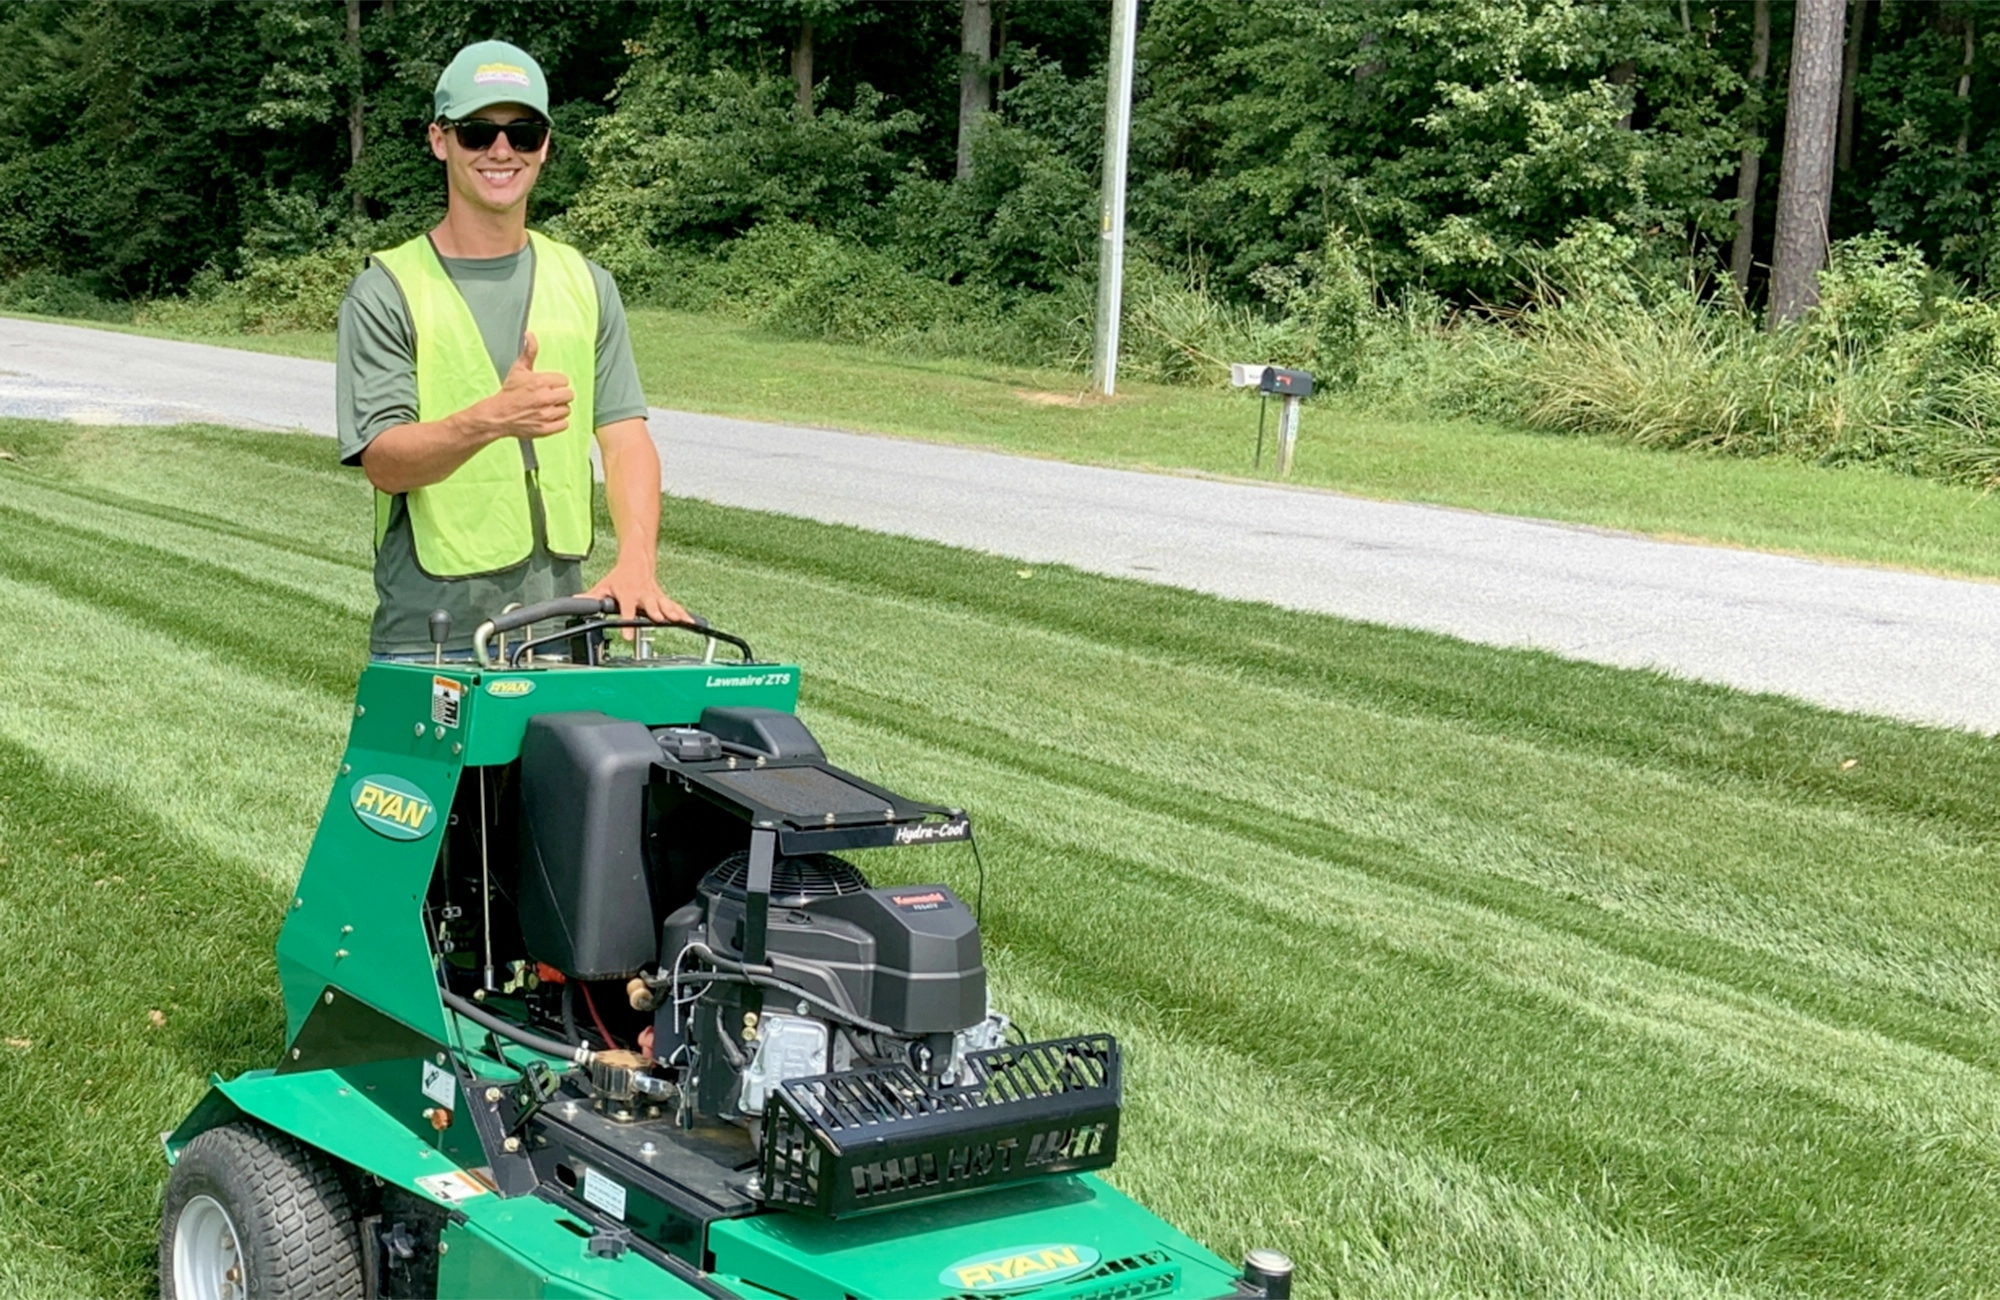 <h3>Aeration & Seeding</h3>
<p>Among the many possible lawn care maintenance processes to choose from that lawns should receive each year; few are more important than aeration and seeding. This mechanical process is essential in providing lawns with the building blocks they need to stay full and healthy year-round.</p>